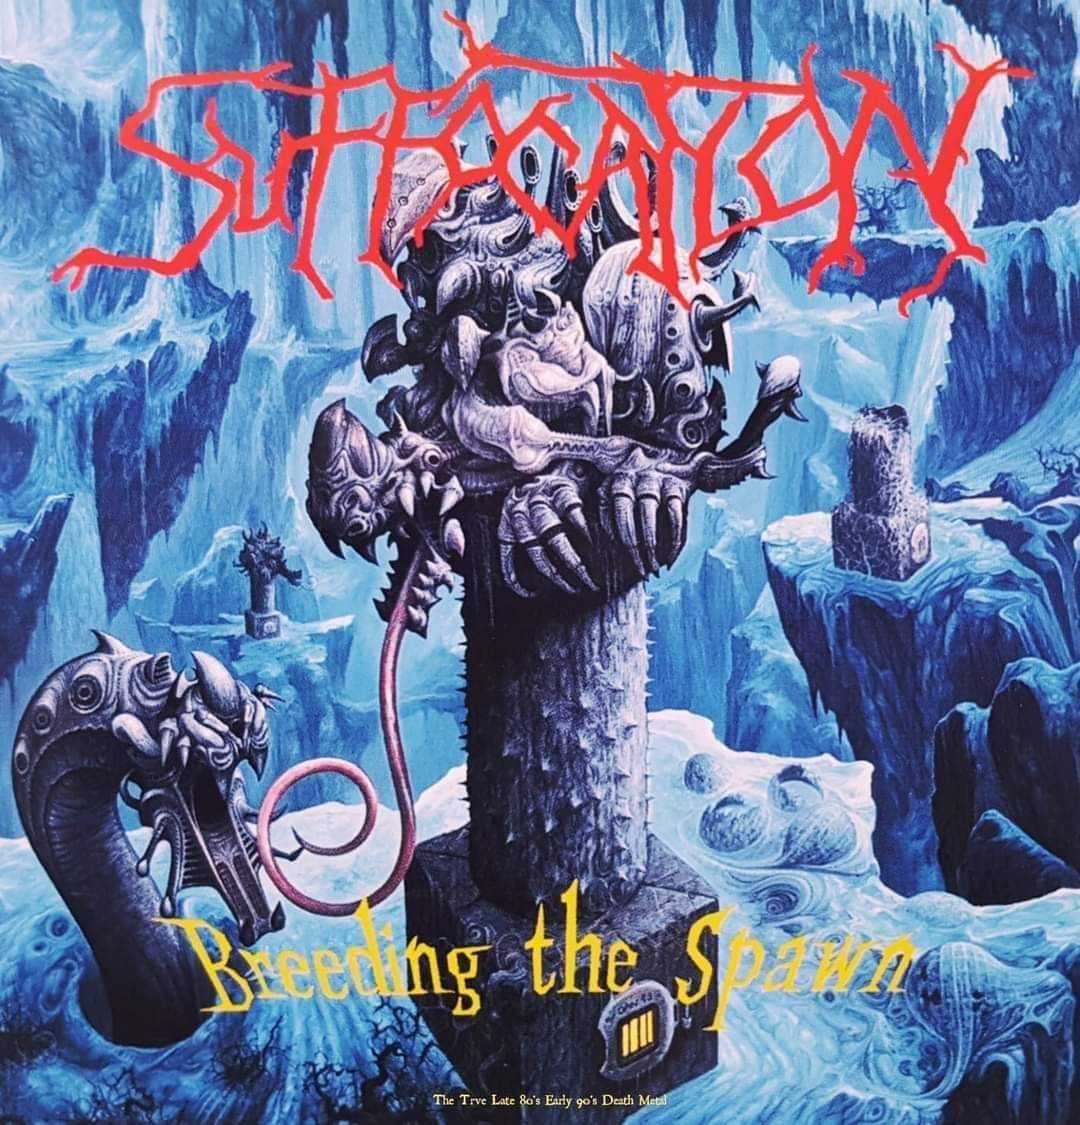 SUFFOCATION ' Breeding the spawn' Released on May 18 th 1993 31 Years ago today!